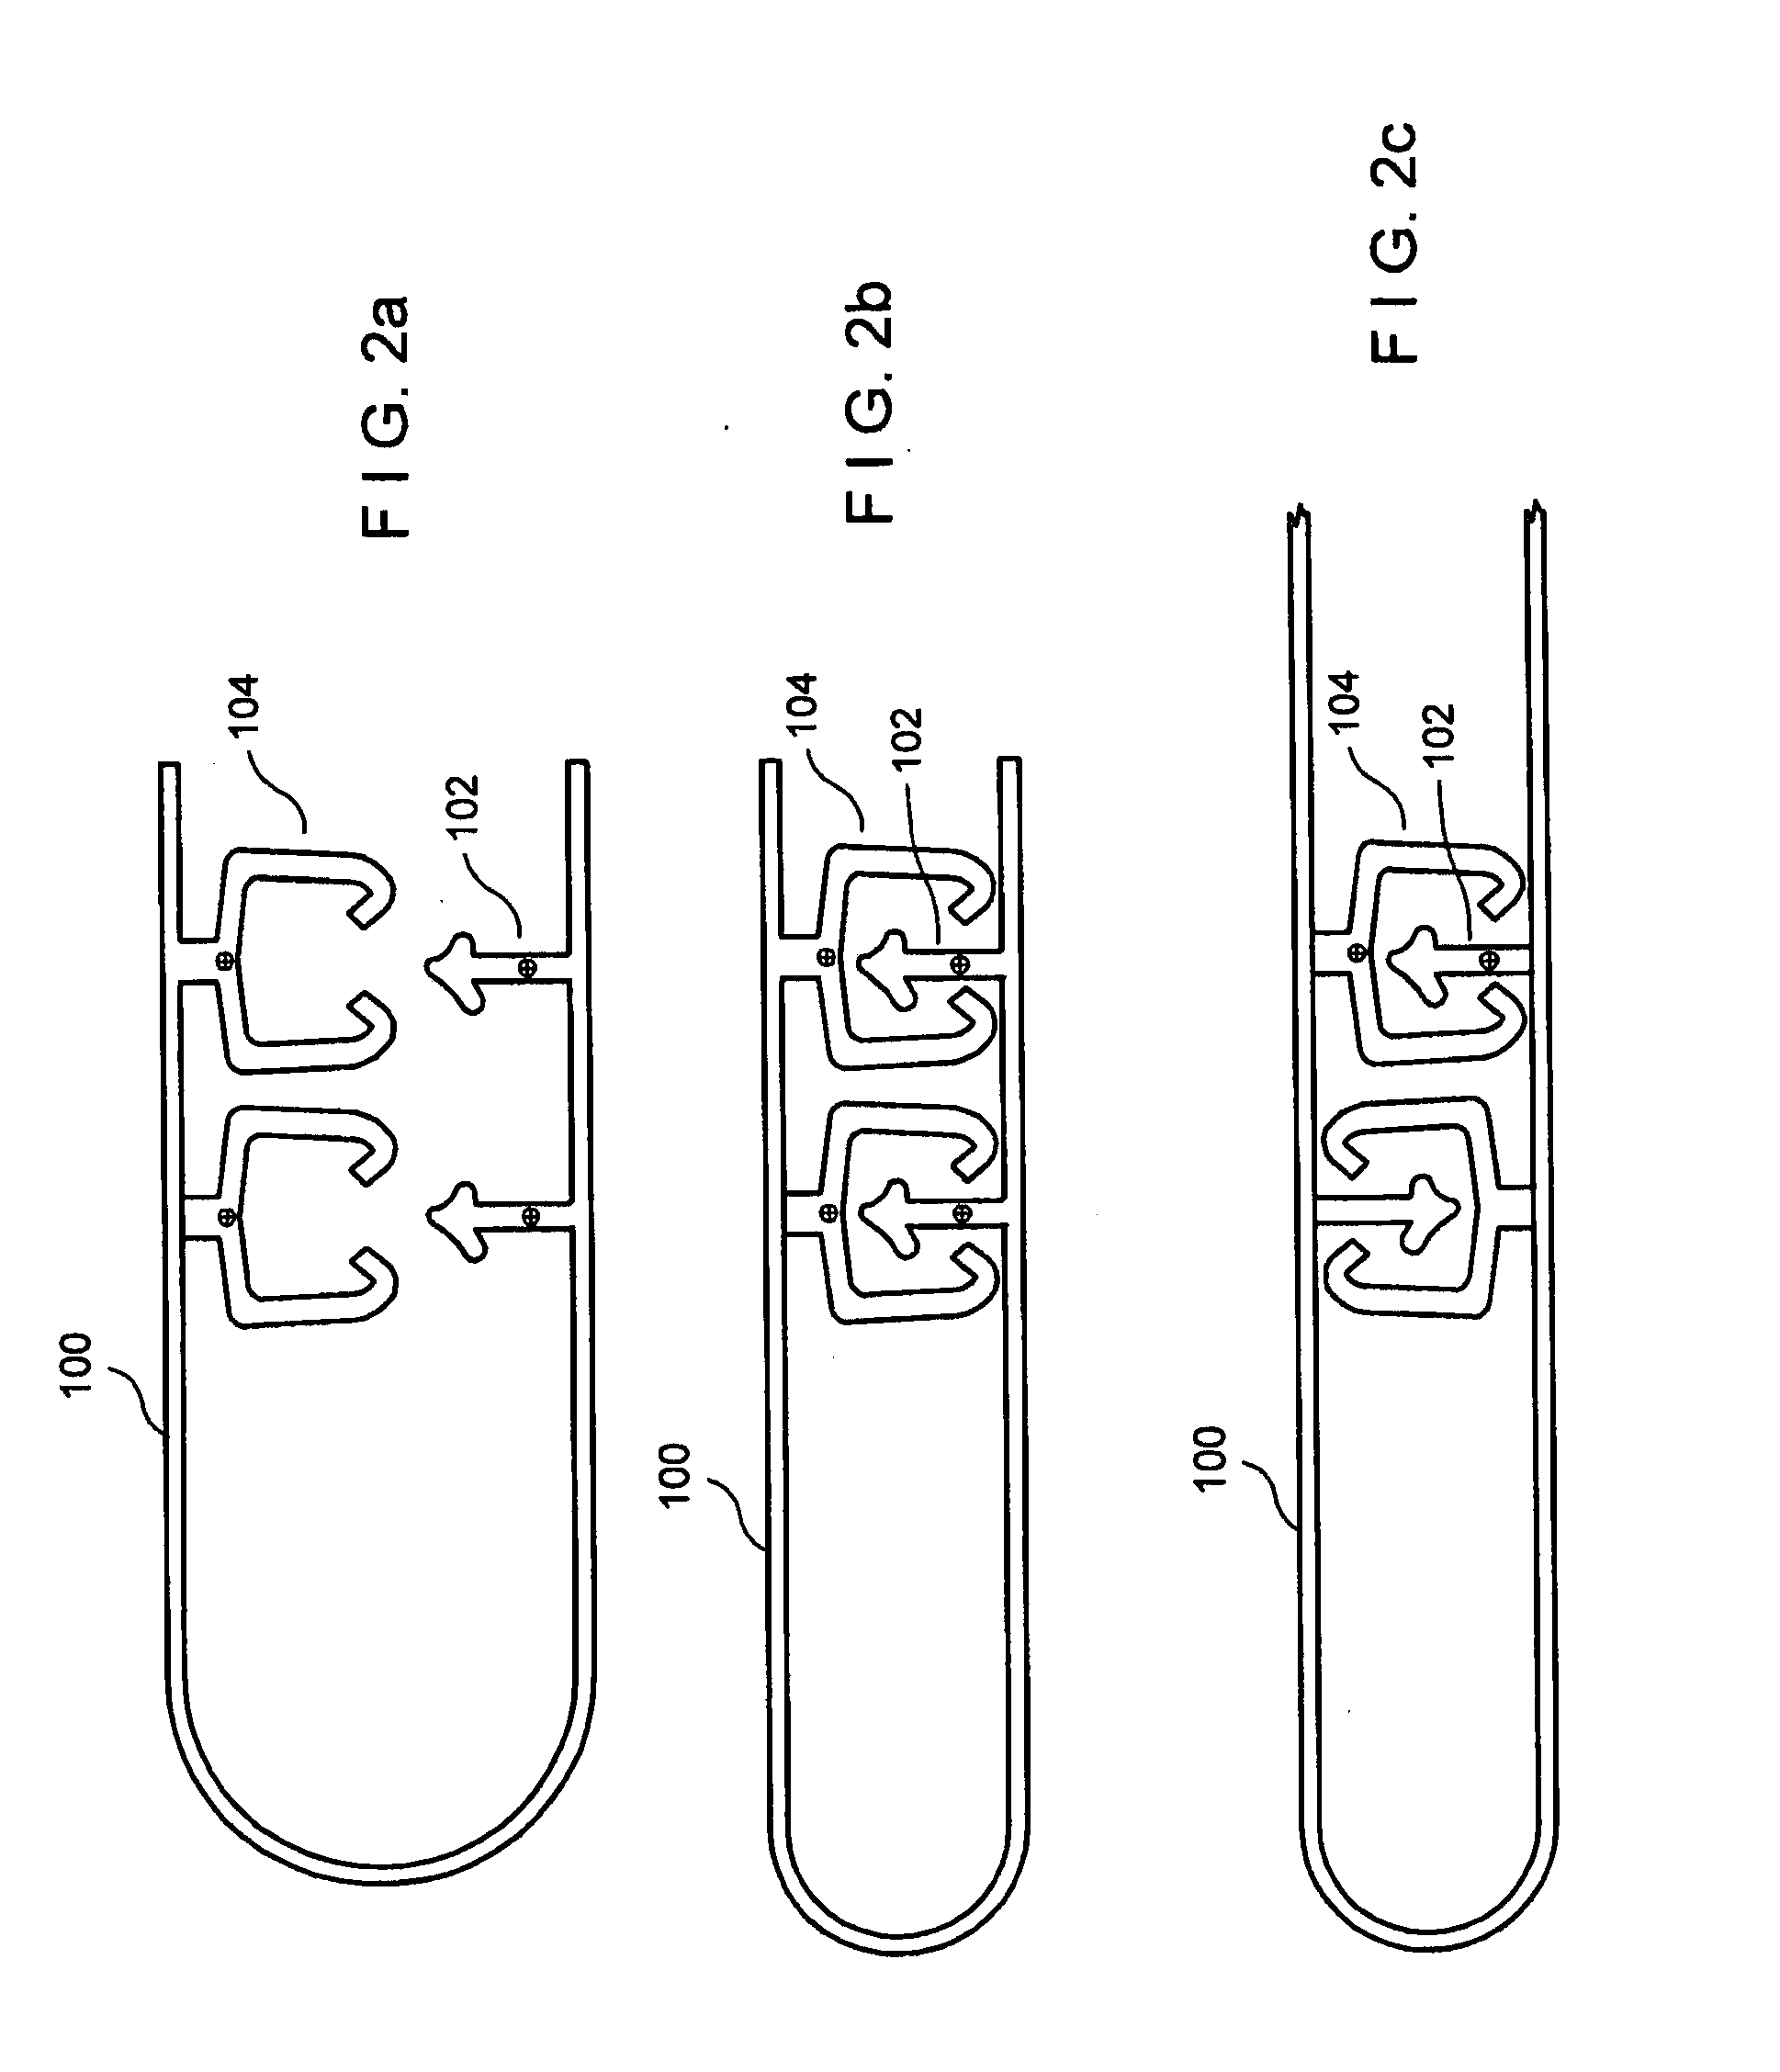 Method to accurately control size, velocity, and relative position sets of reclosable mechanism